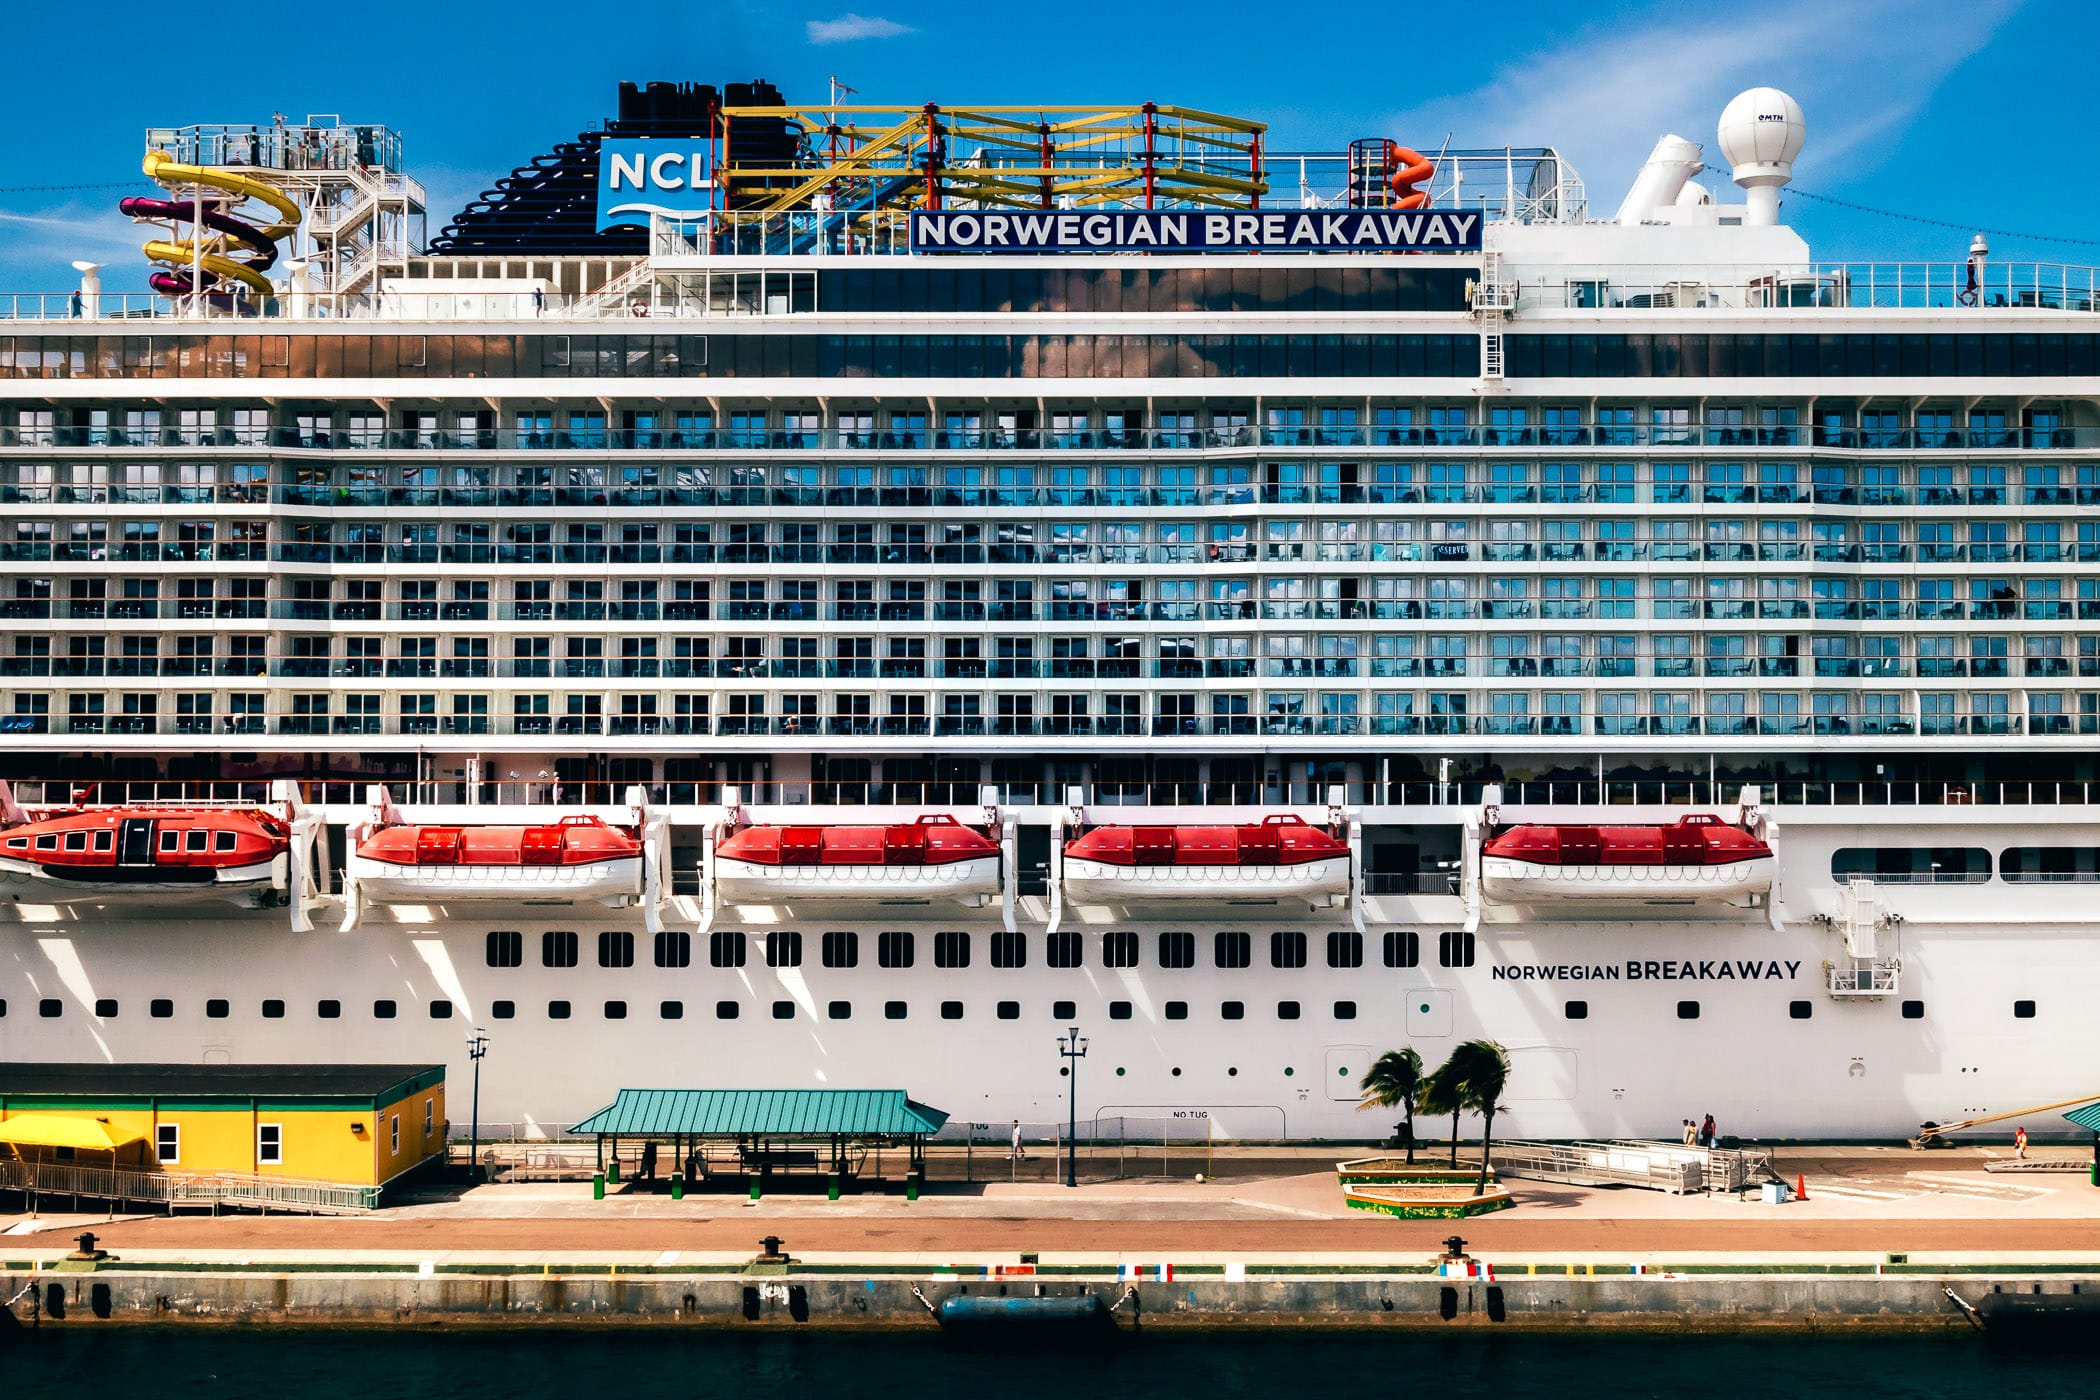 Detail of the midsection of the cruise ship Norwegian Breakaway, docked at a pier in Nassau, Bahamas.